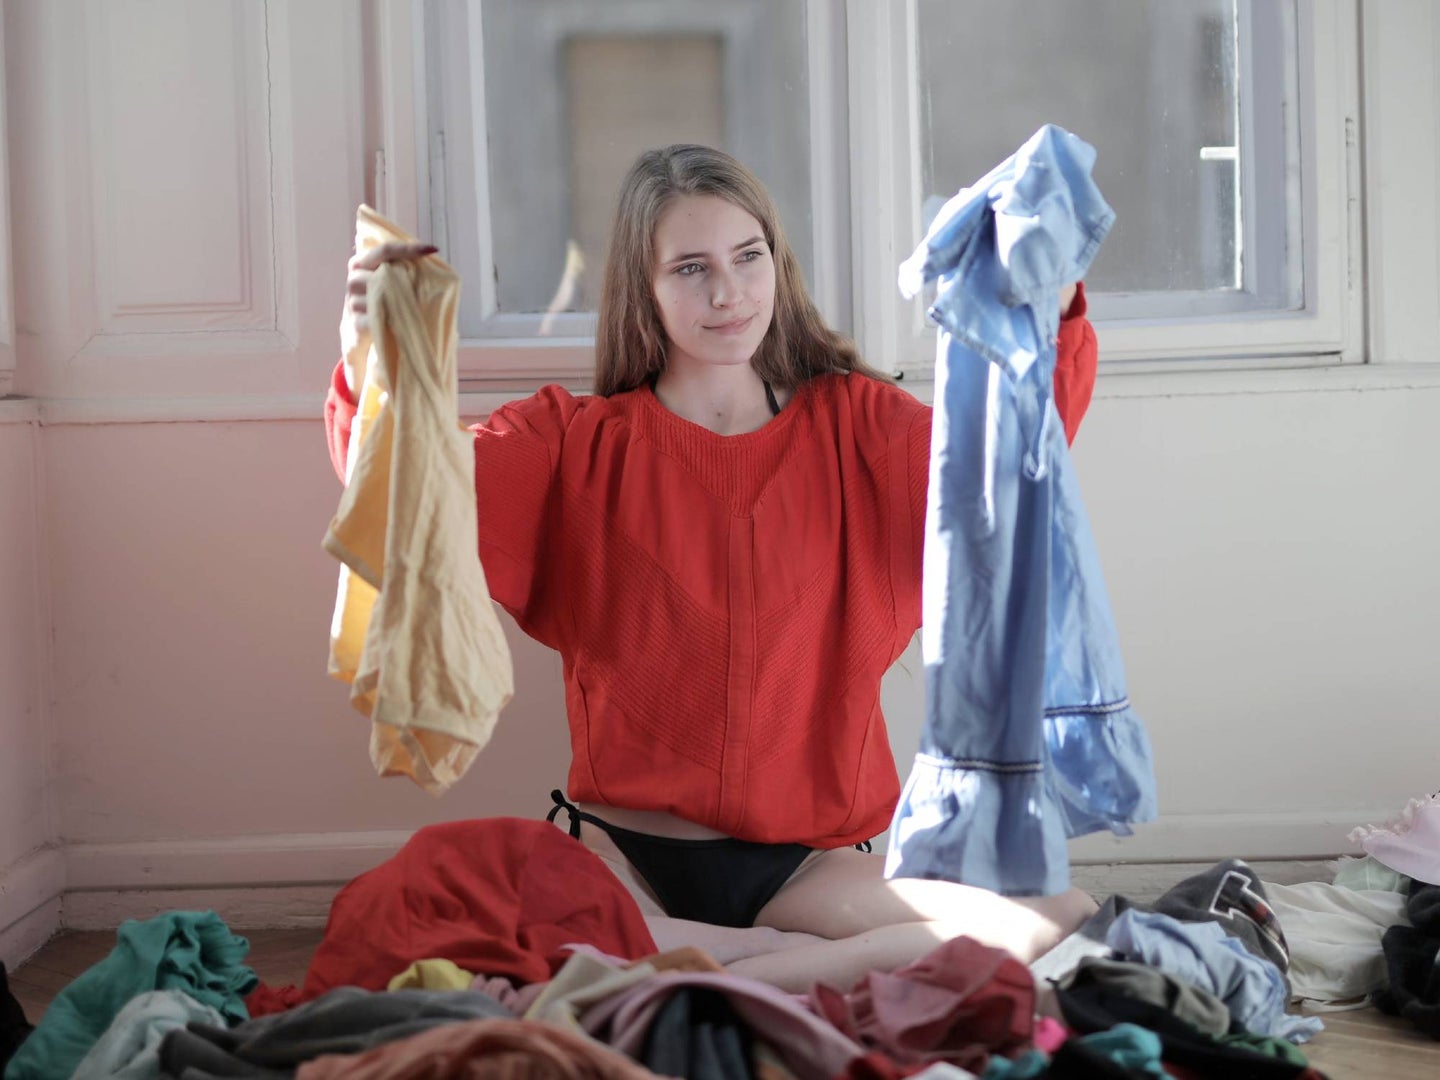 person on the floor sorting laundry